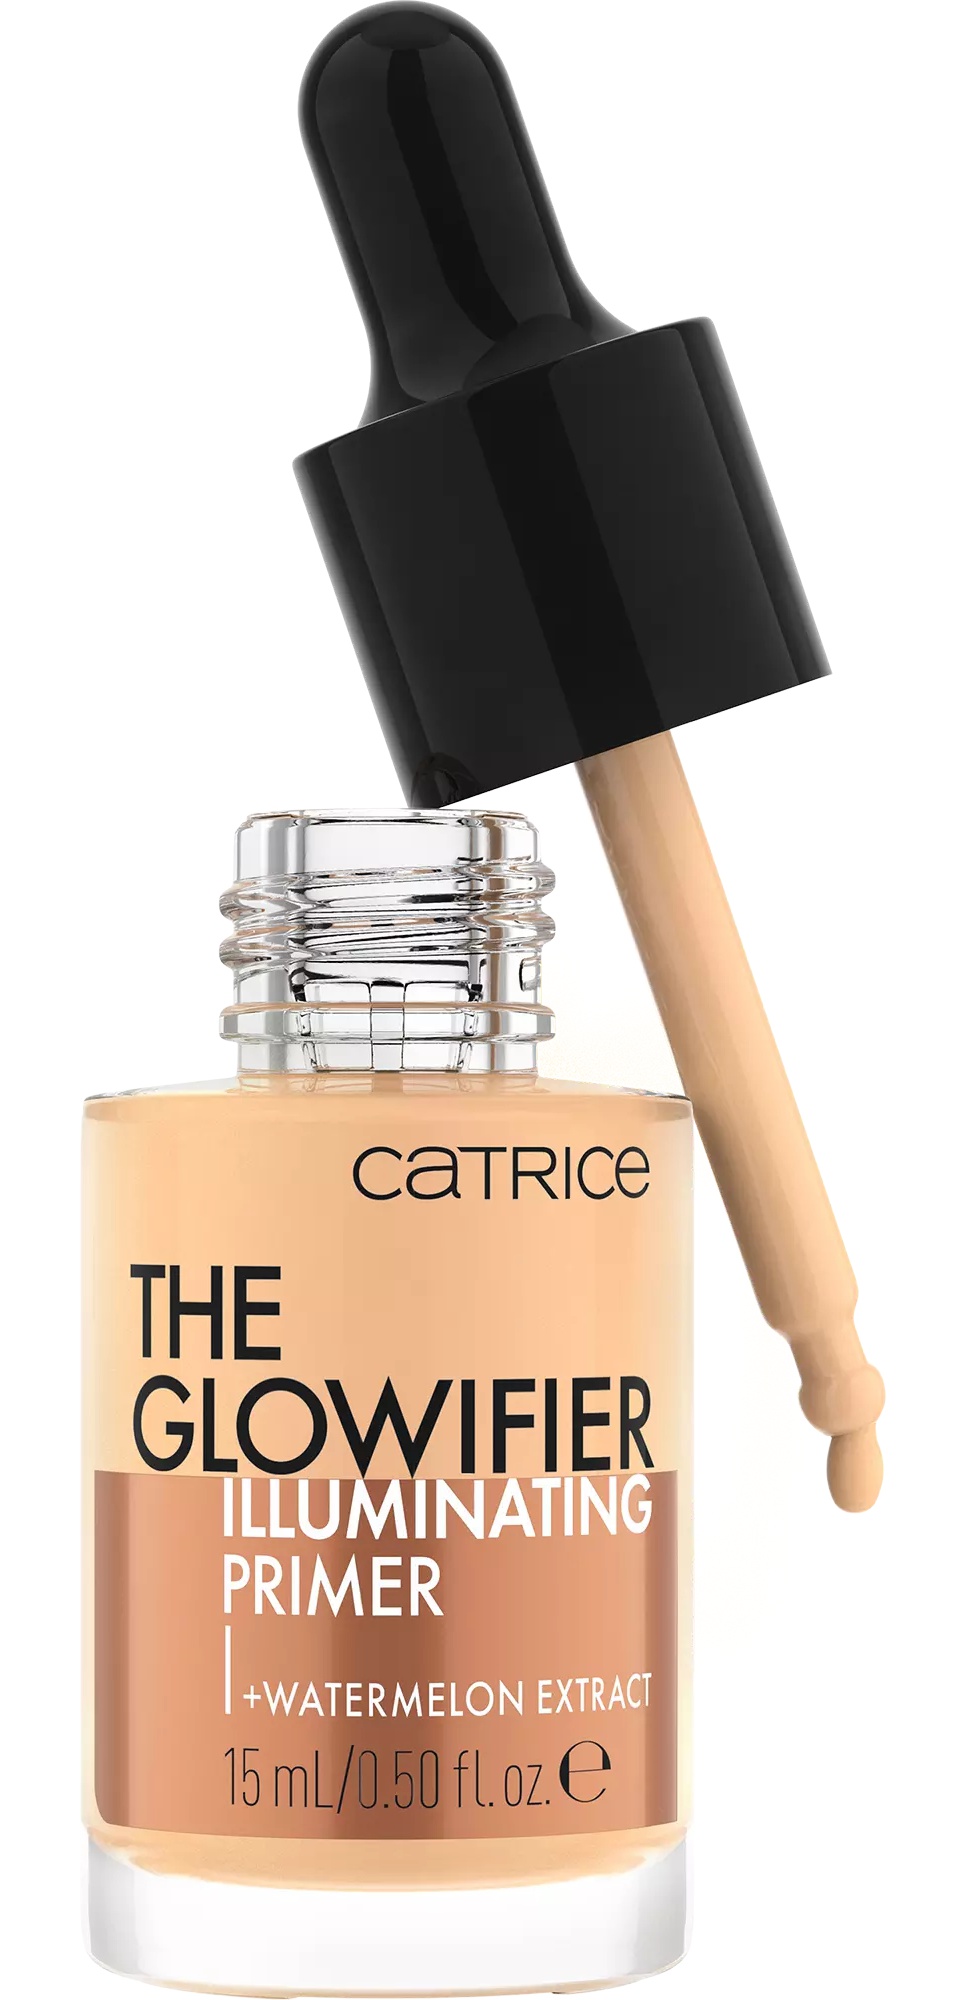 Catrice The Glowifier Illuminating Primer